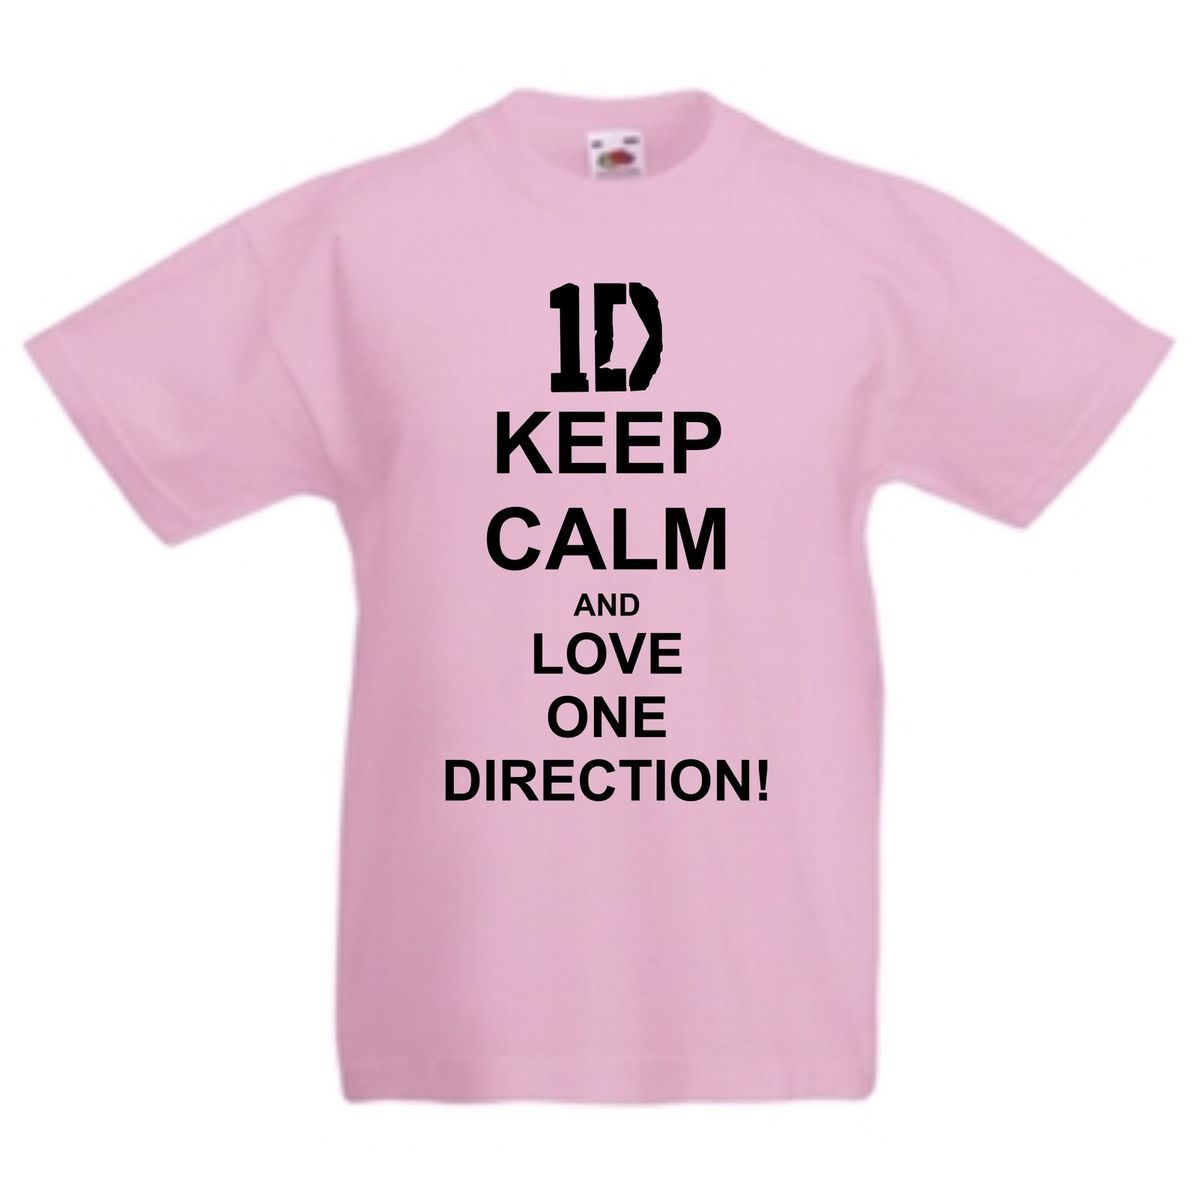 One Direction Cute Funny Kids Fan T Shirt All Childrens Sizes